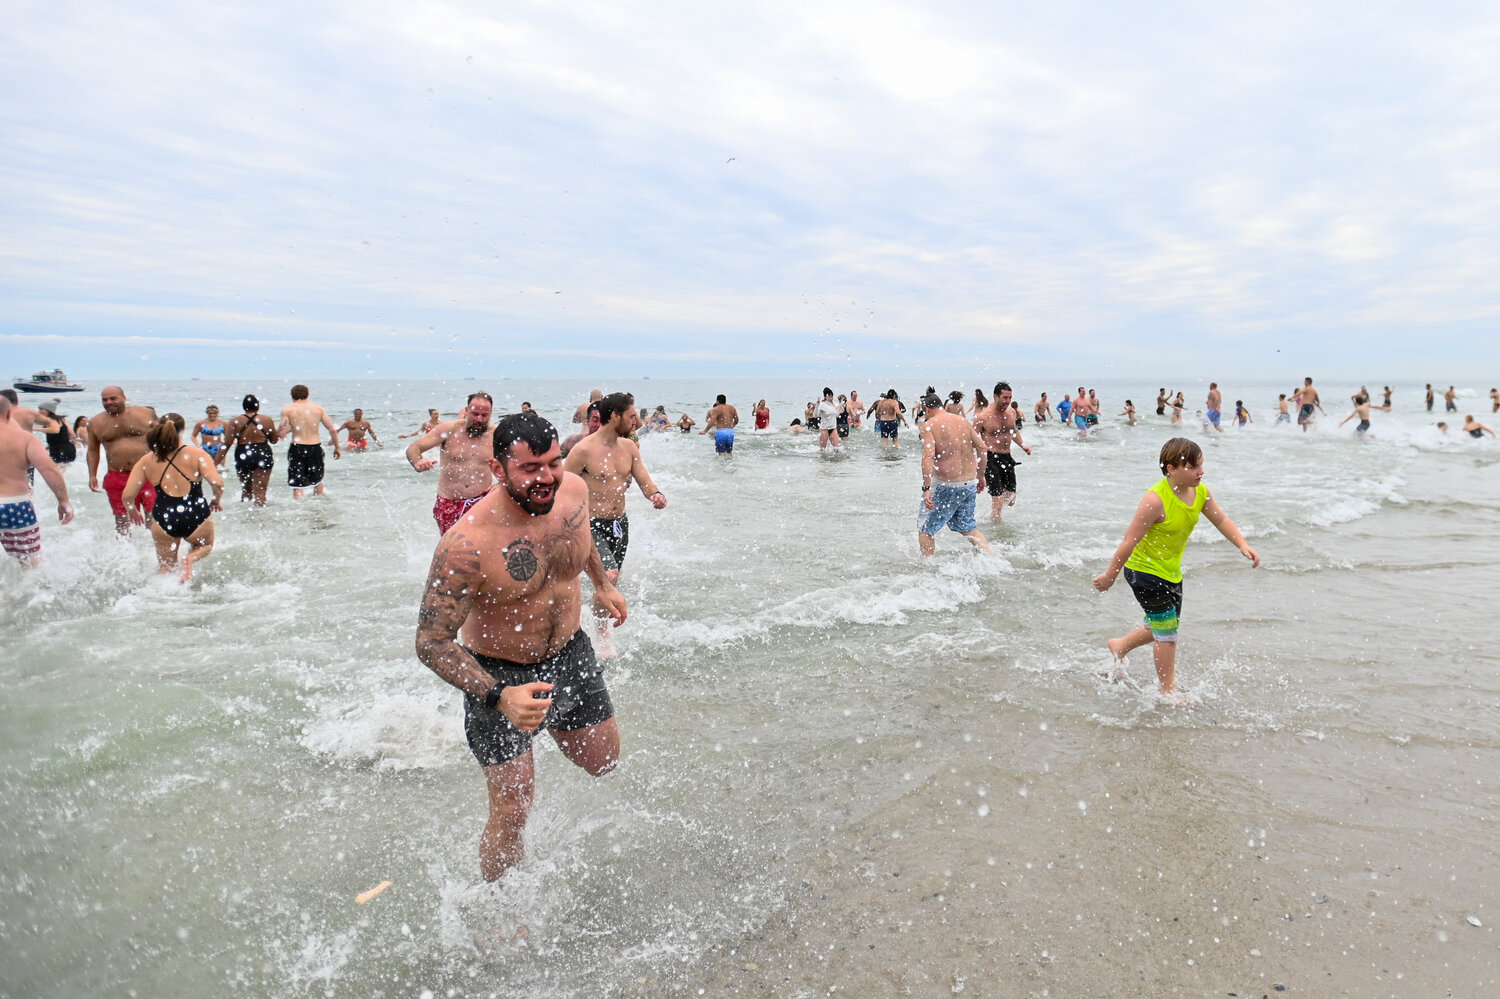 Groups of friends and family take the frigid plunge together each year.